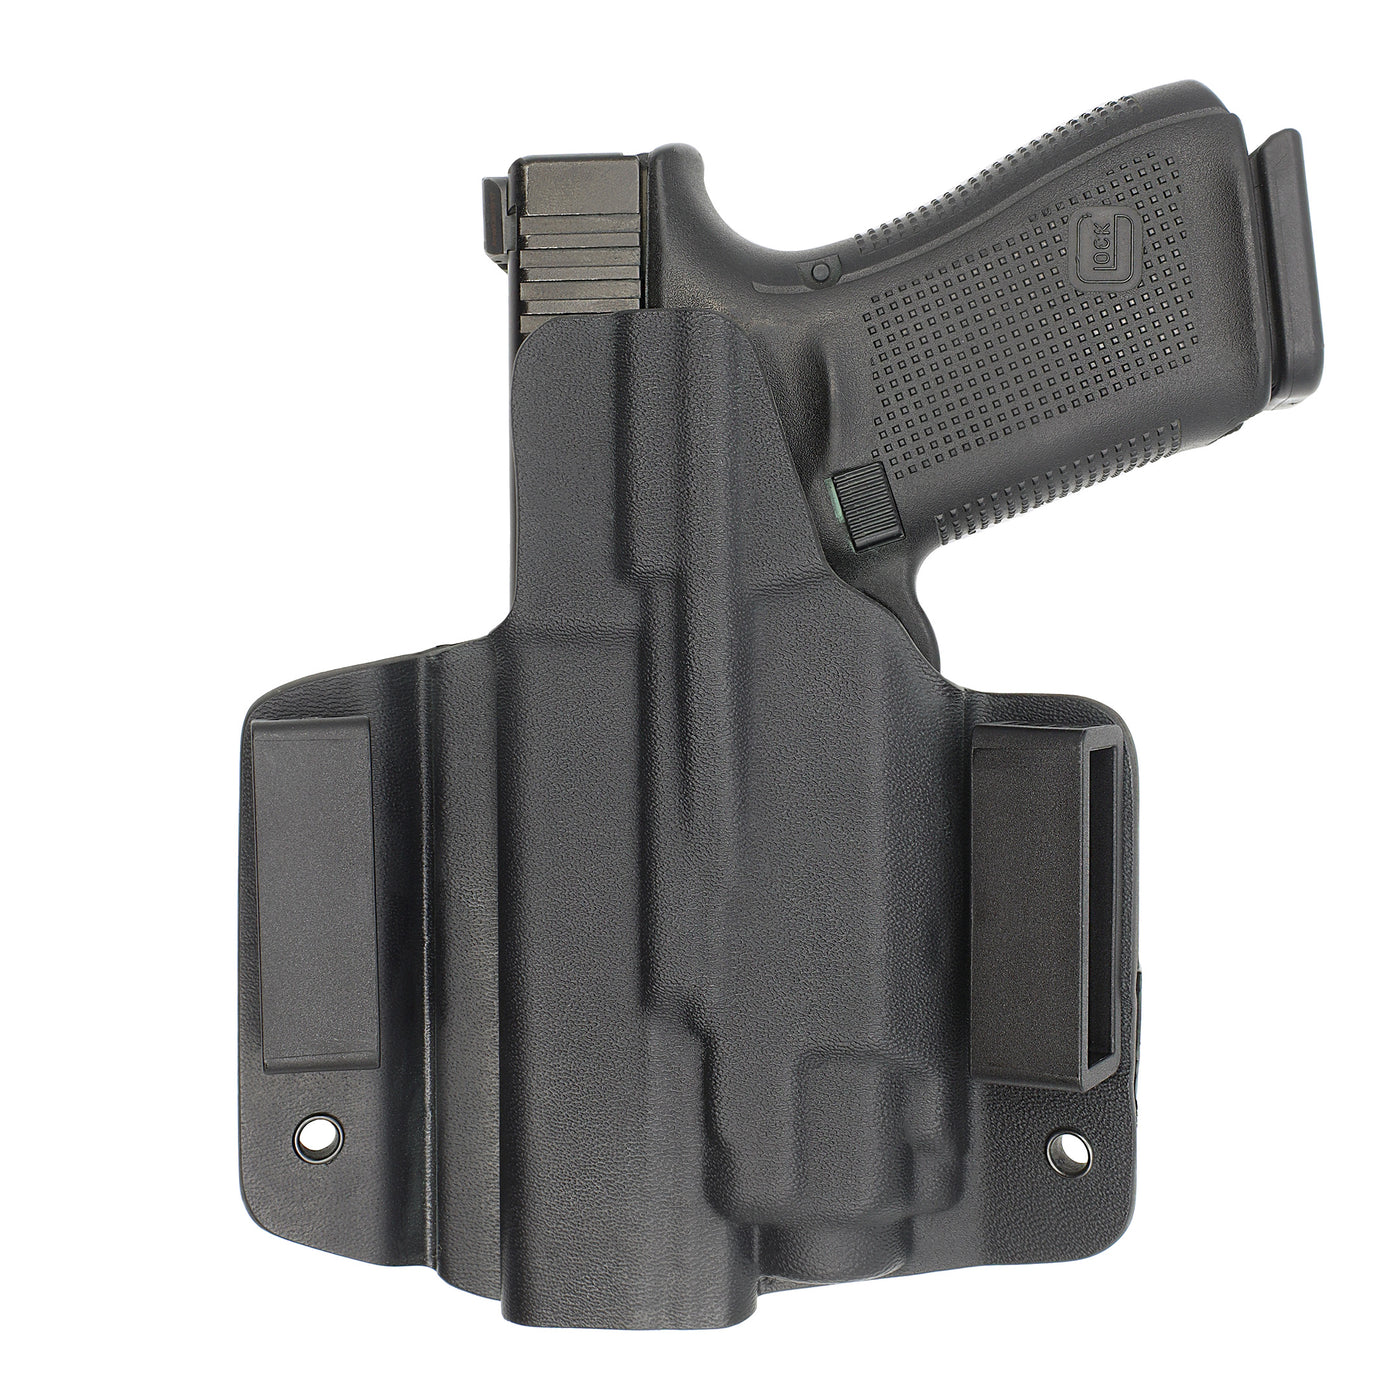 C&G Holsters Quickship OWB Tactical CZ P10/c Streamlight TLR8 holstered back view